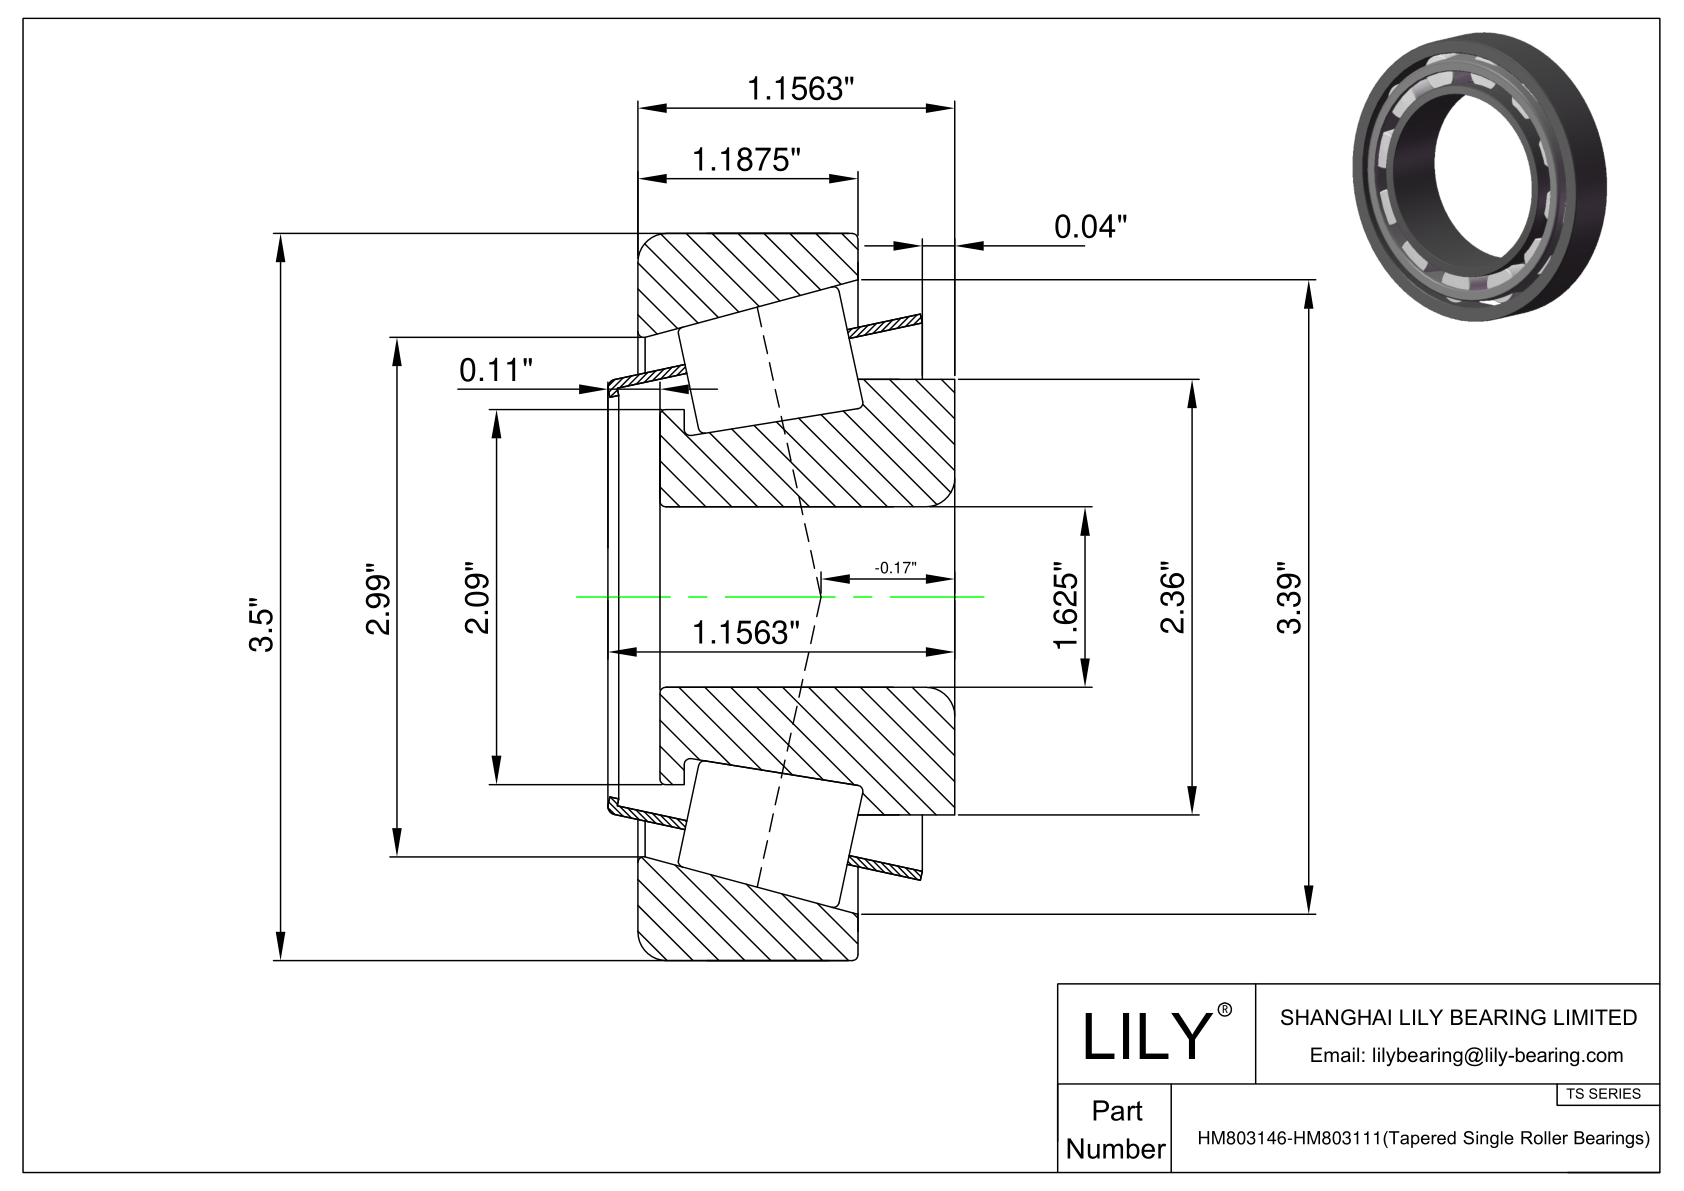 HM803146-HM803111 TS (Tapered Single Roller Bearings) (Imperial) cad drawing